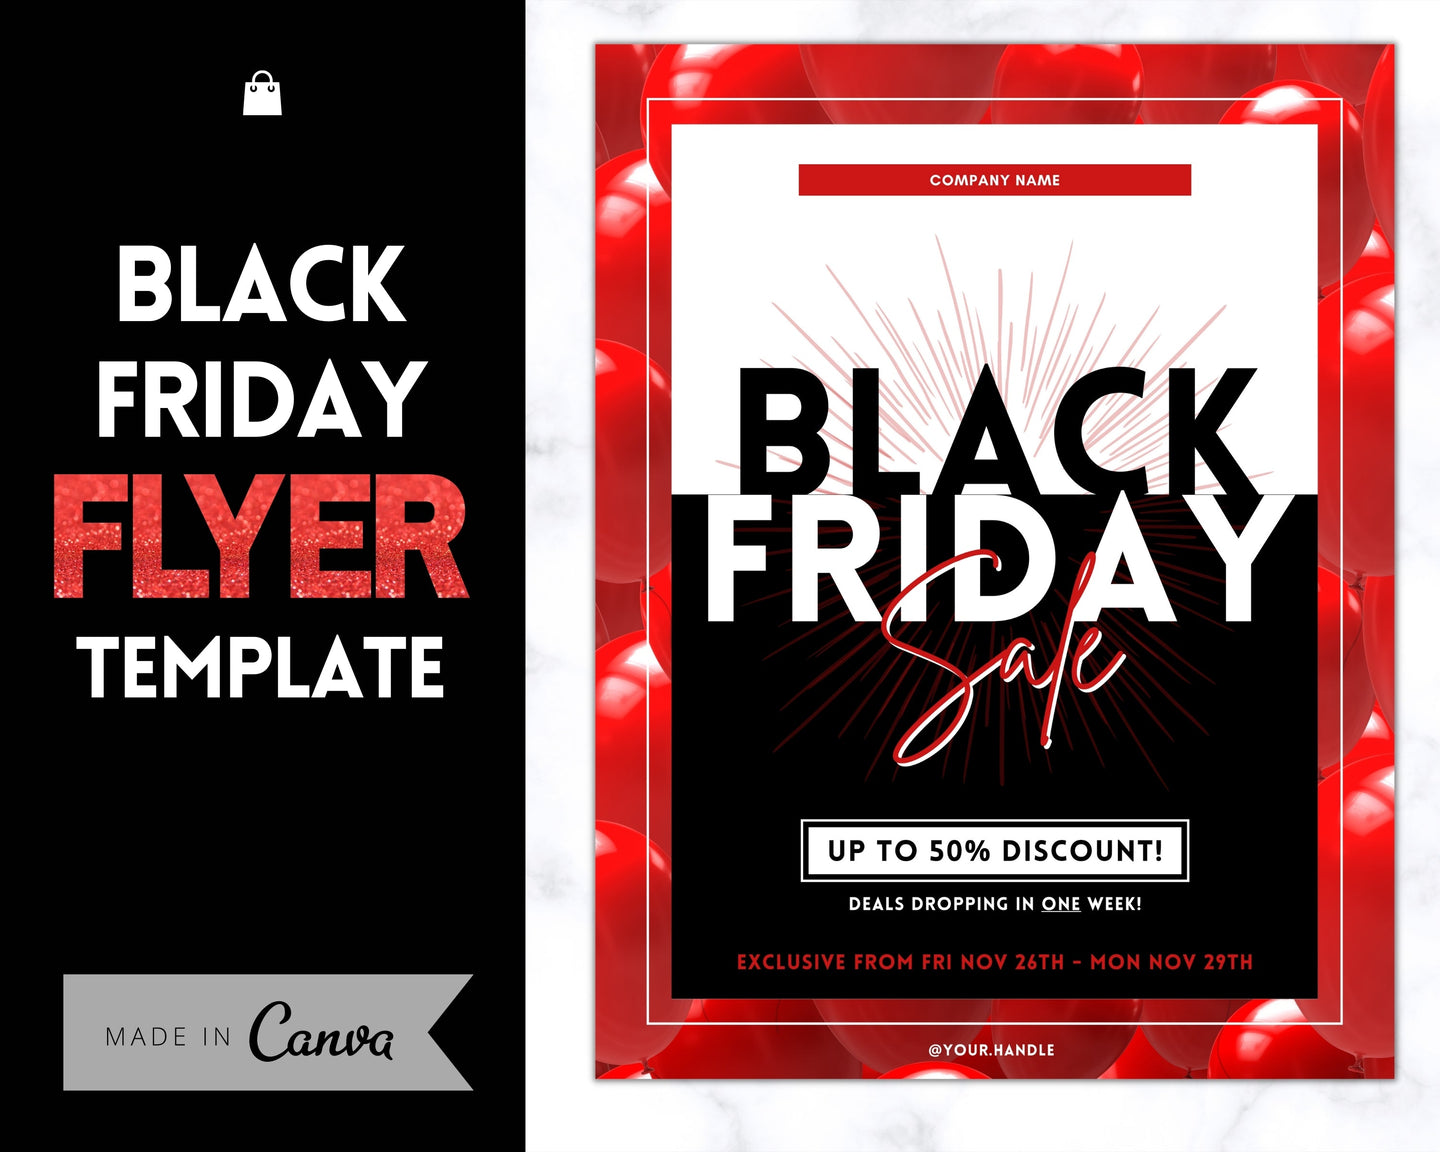 BLACK FRIDAY FLYER Template, Editable Pink Poster, Cyber Monday, Small Business Marketing Branding Template, Christmas Holidays, Flash Sale | Red